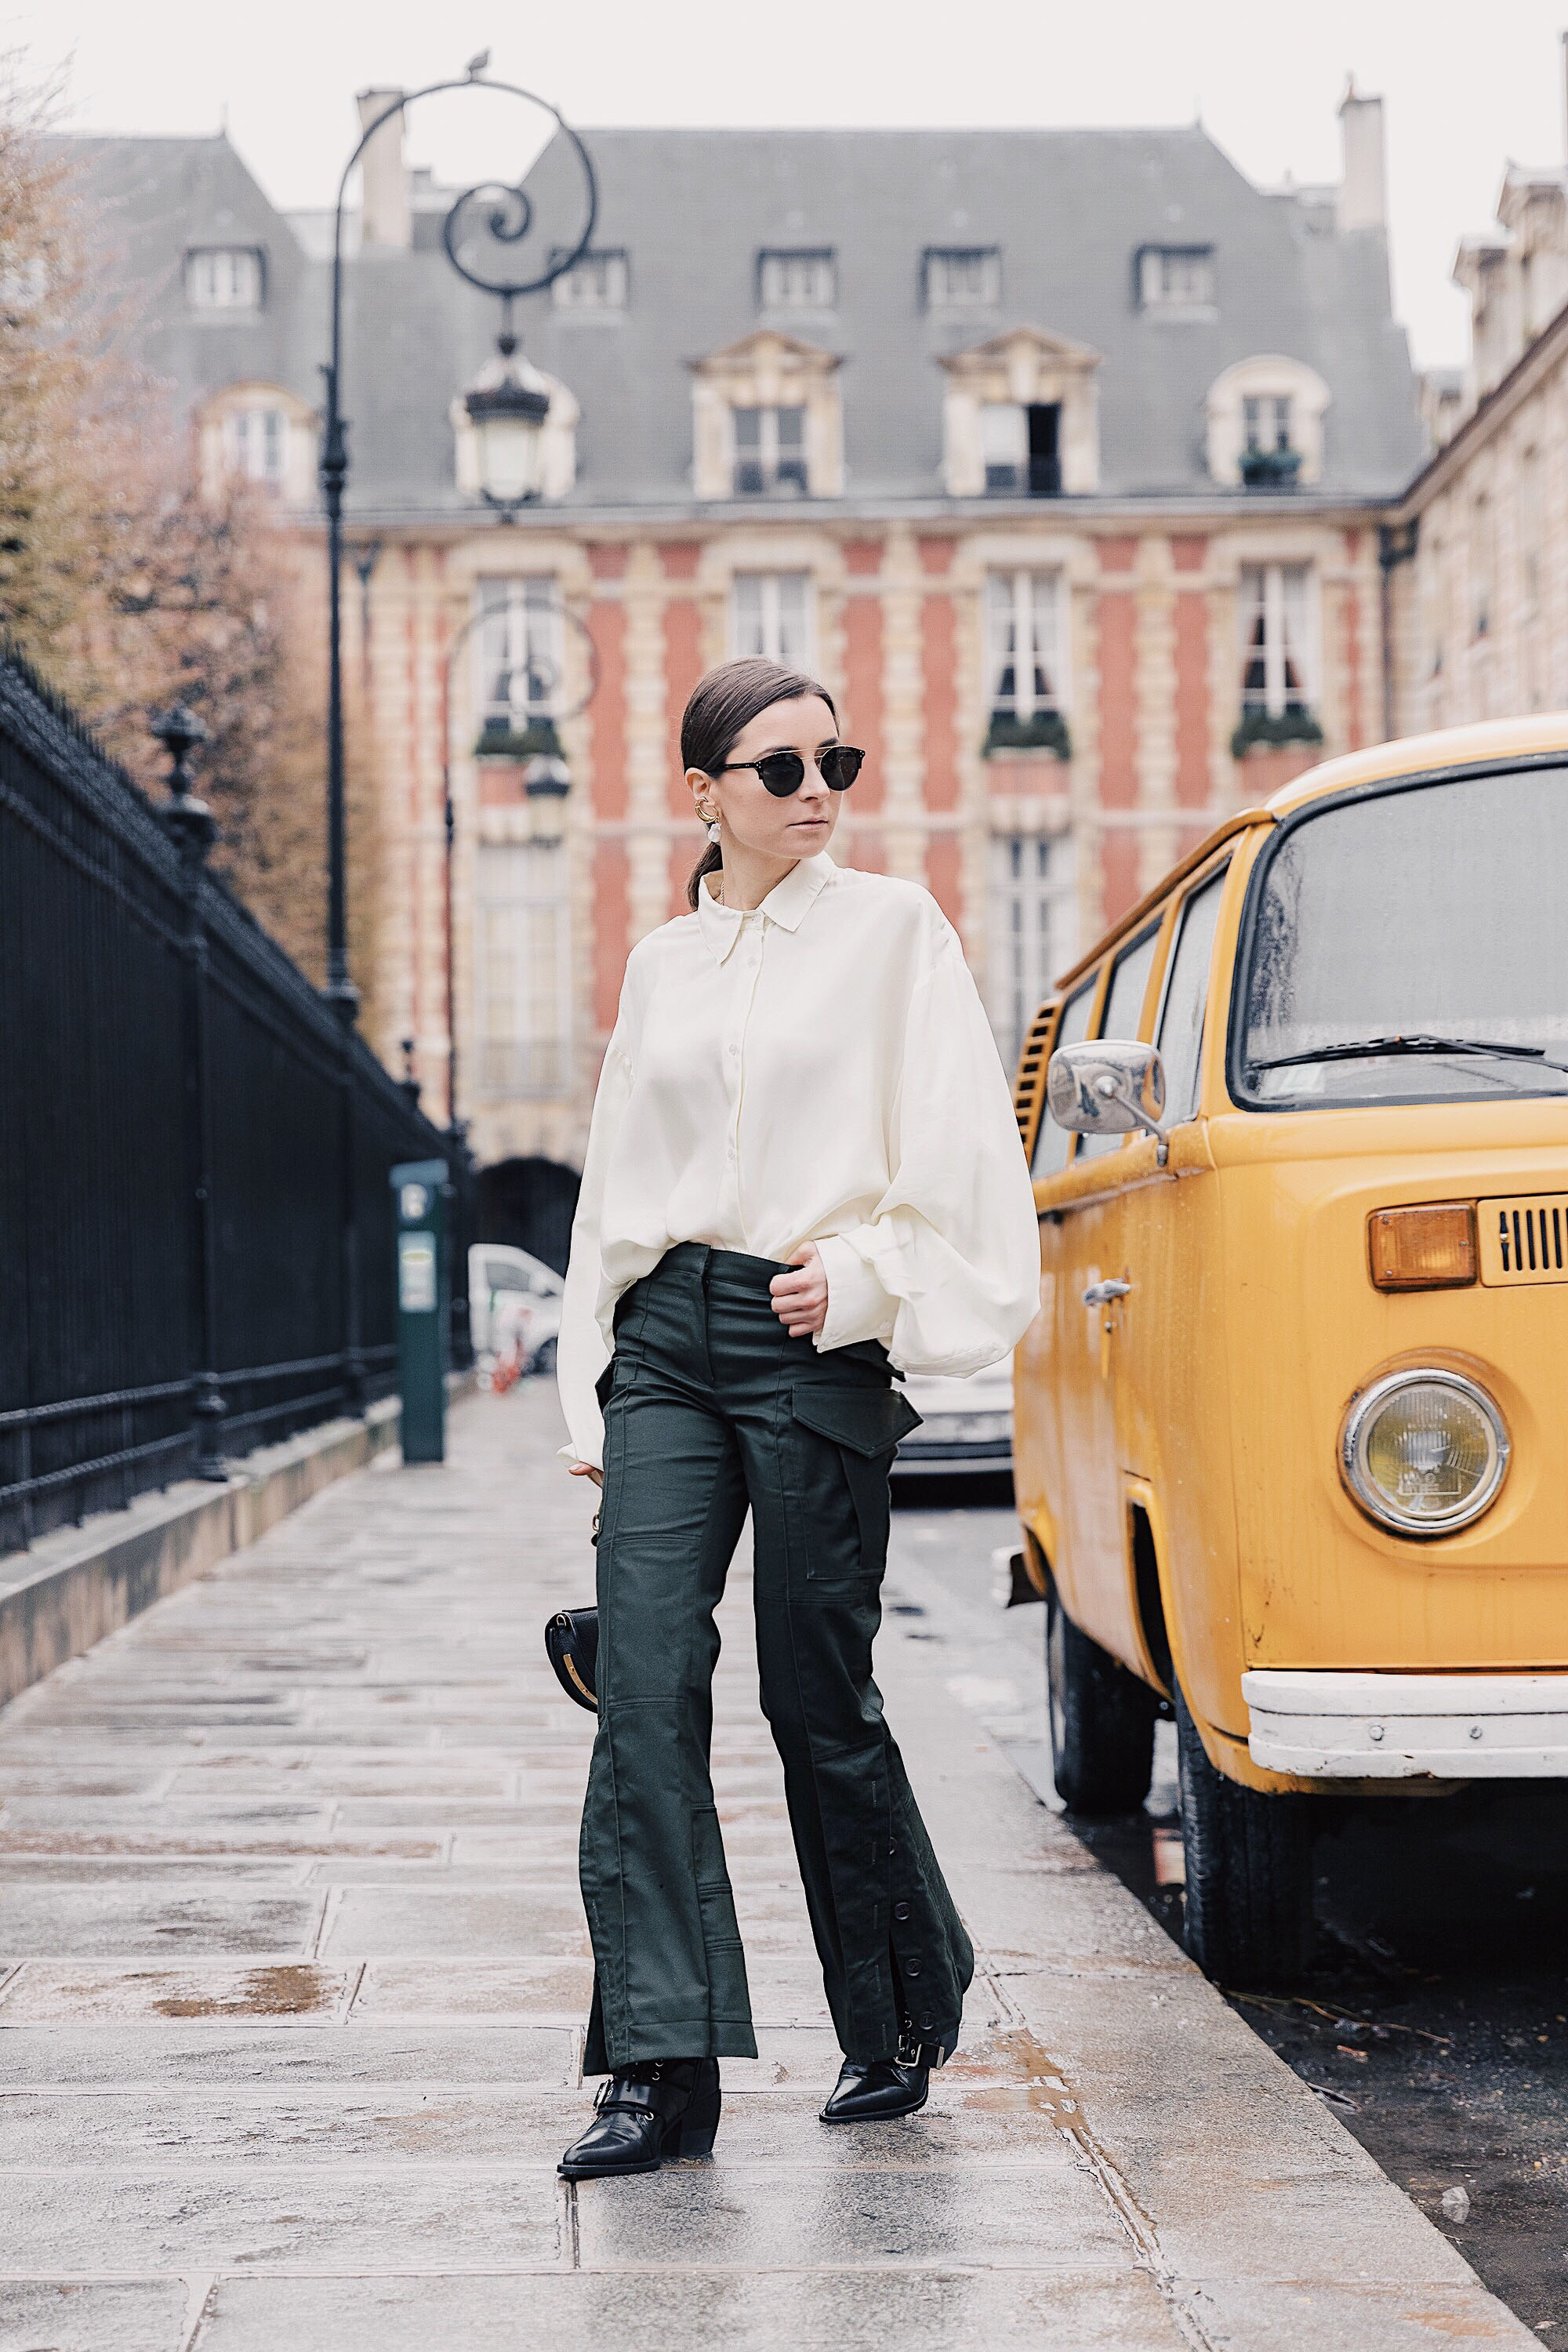 How to style the cargo pants for a business meeting - Julia Comil interviewed by Farfetch - Cargo pants by Rokh - cropped trousers rokh